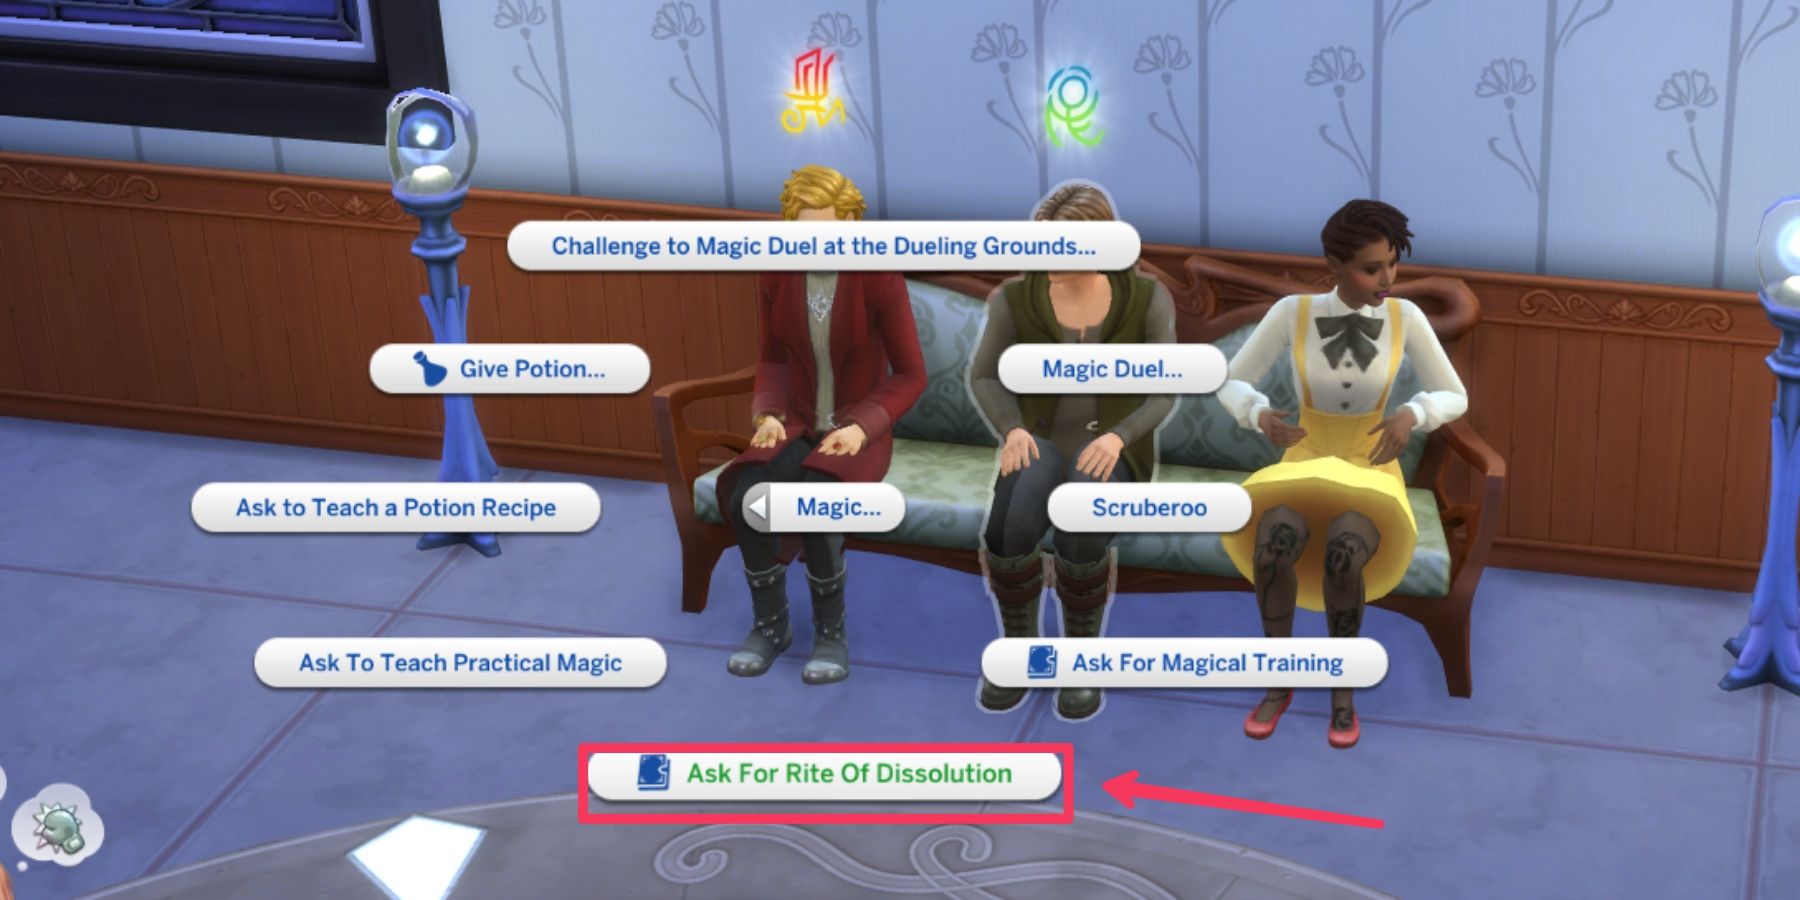 the rite of dissolution in the sims 4